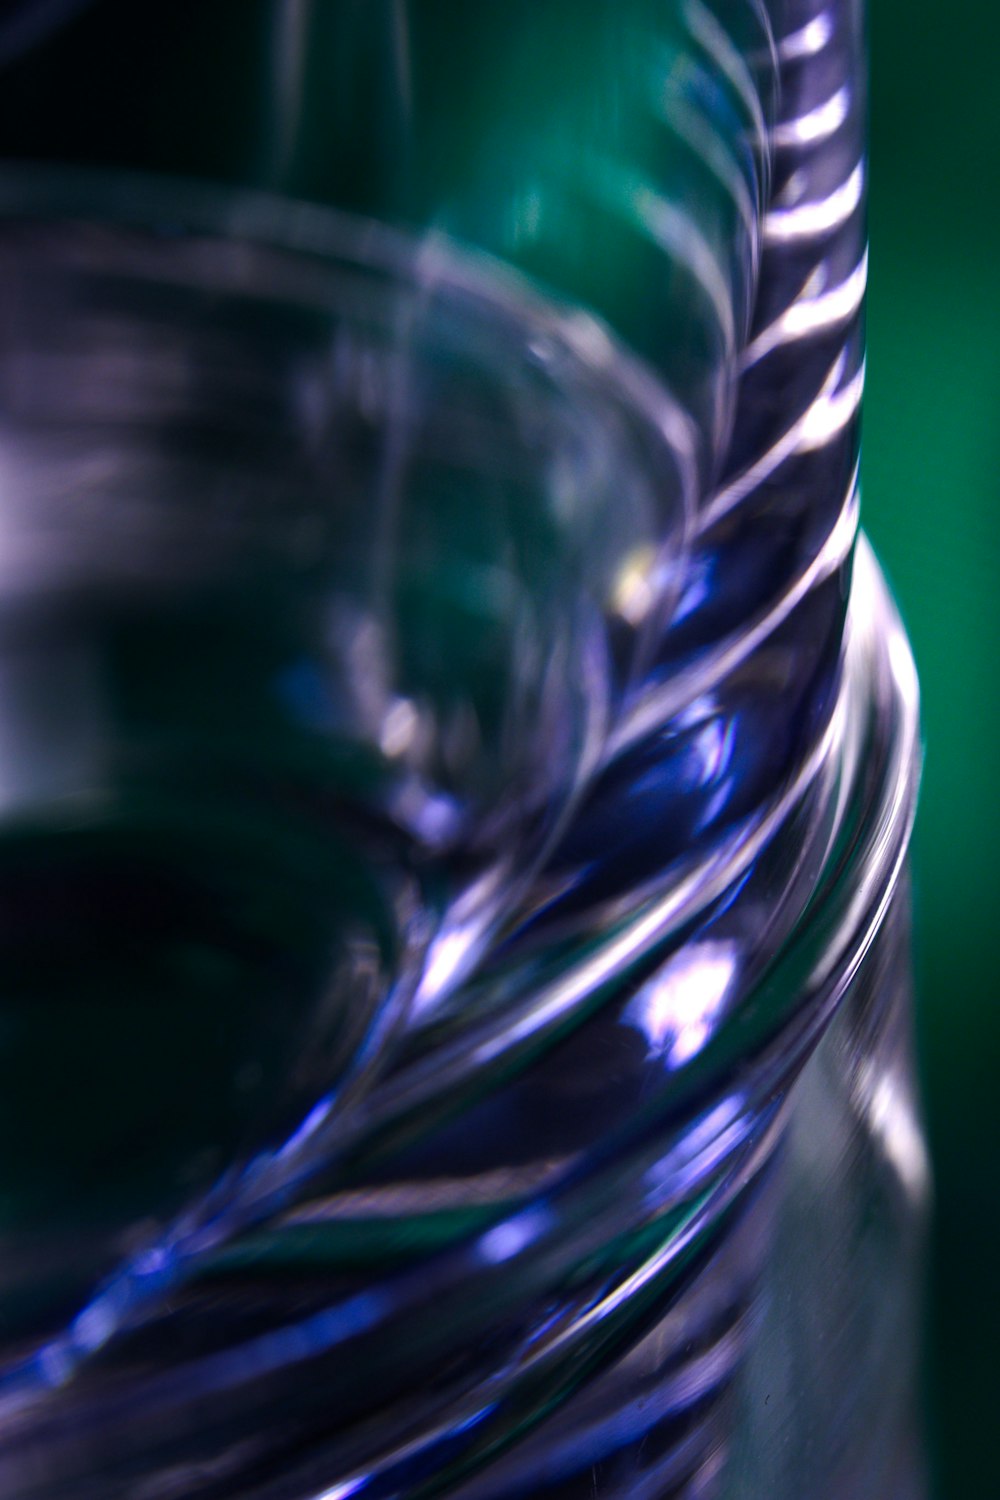 a close up of a glass with a blurry background